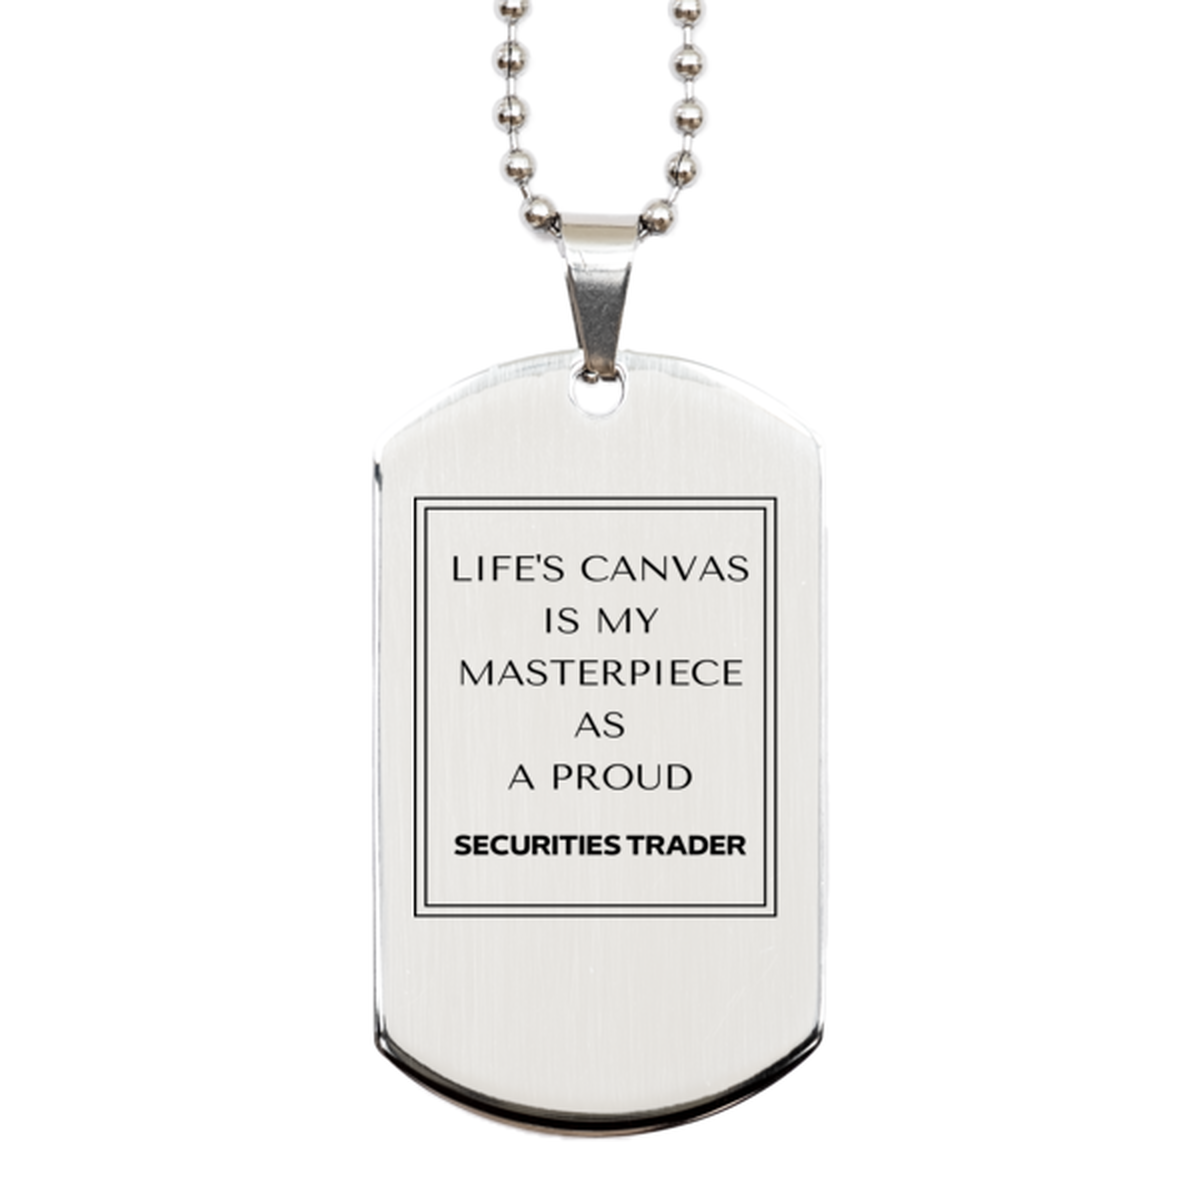 Proud Securities Trader Gifts, Life's canvas is my masterpiece, Epic Birthday Christmas Unique Silver Dog Tag For Securities Trader, Coworkers, Men, Women, Friends